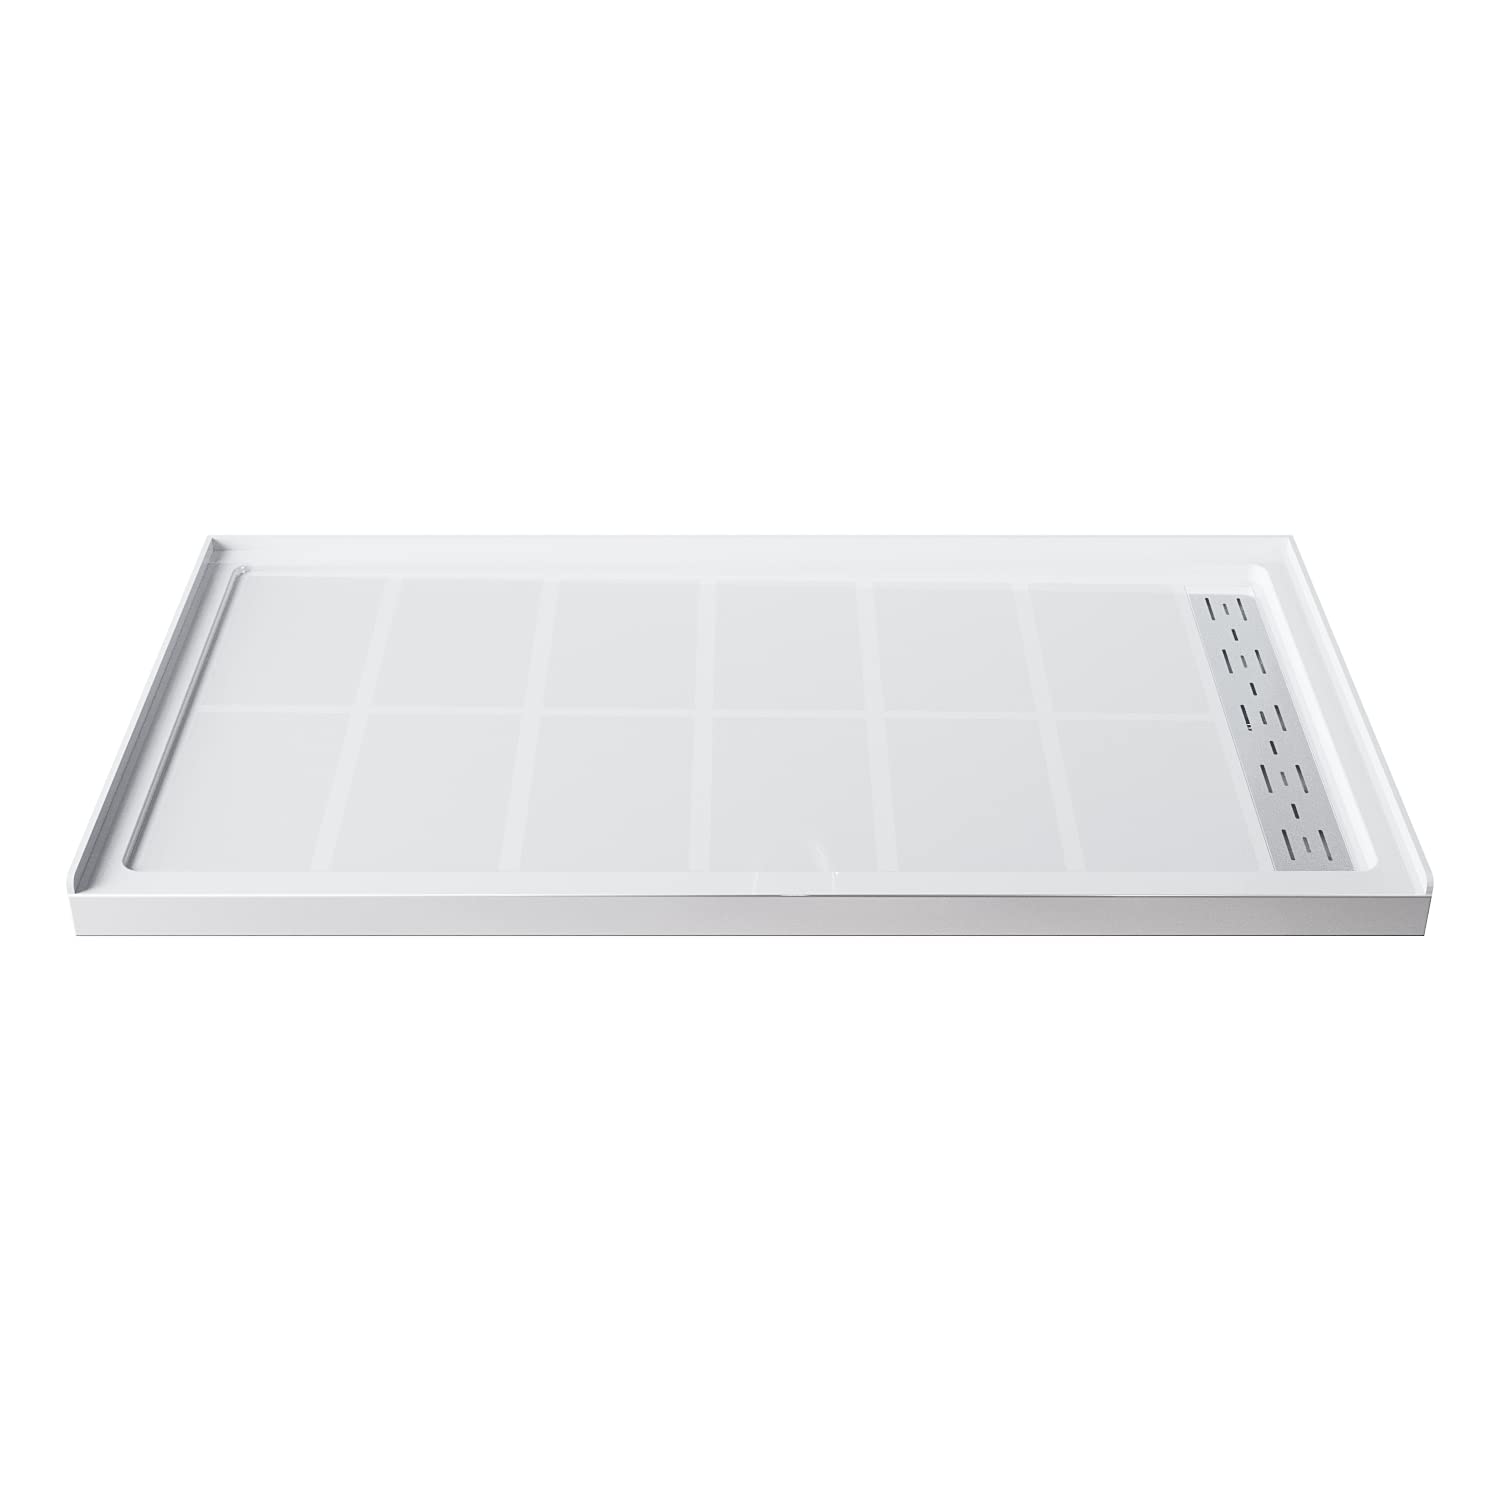 SUNNY SHOWER 48 in. W x 36 in. D x 4 in. H White Right Drain Rectangular Base